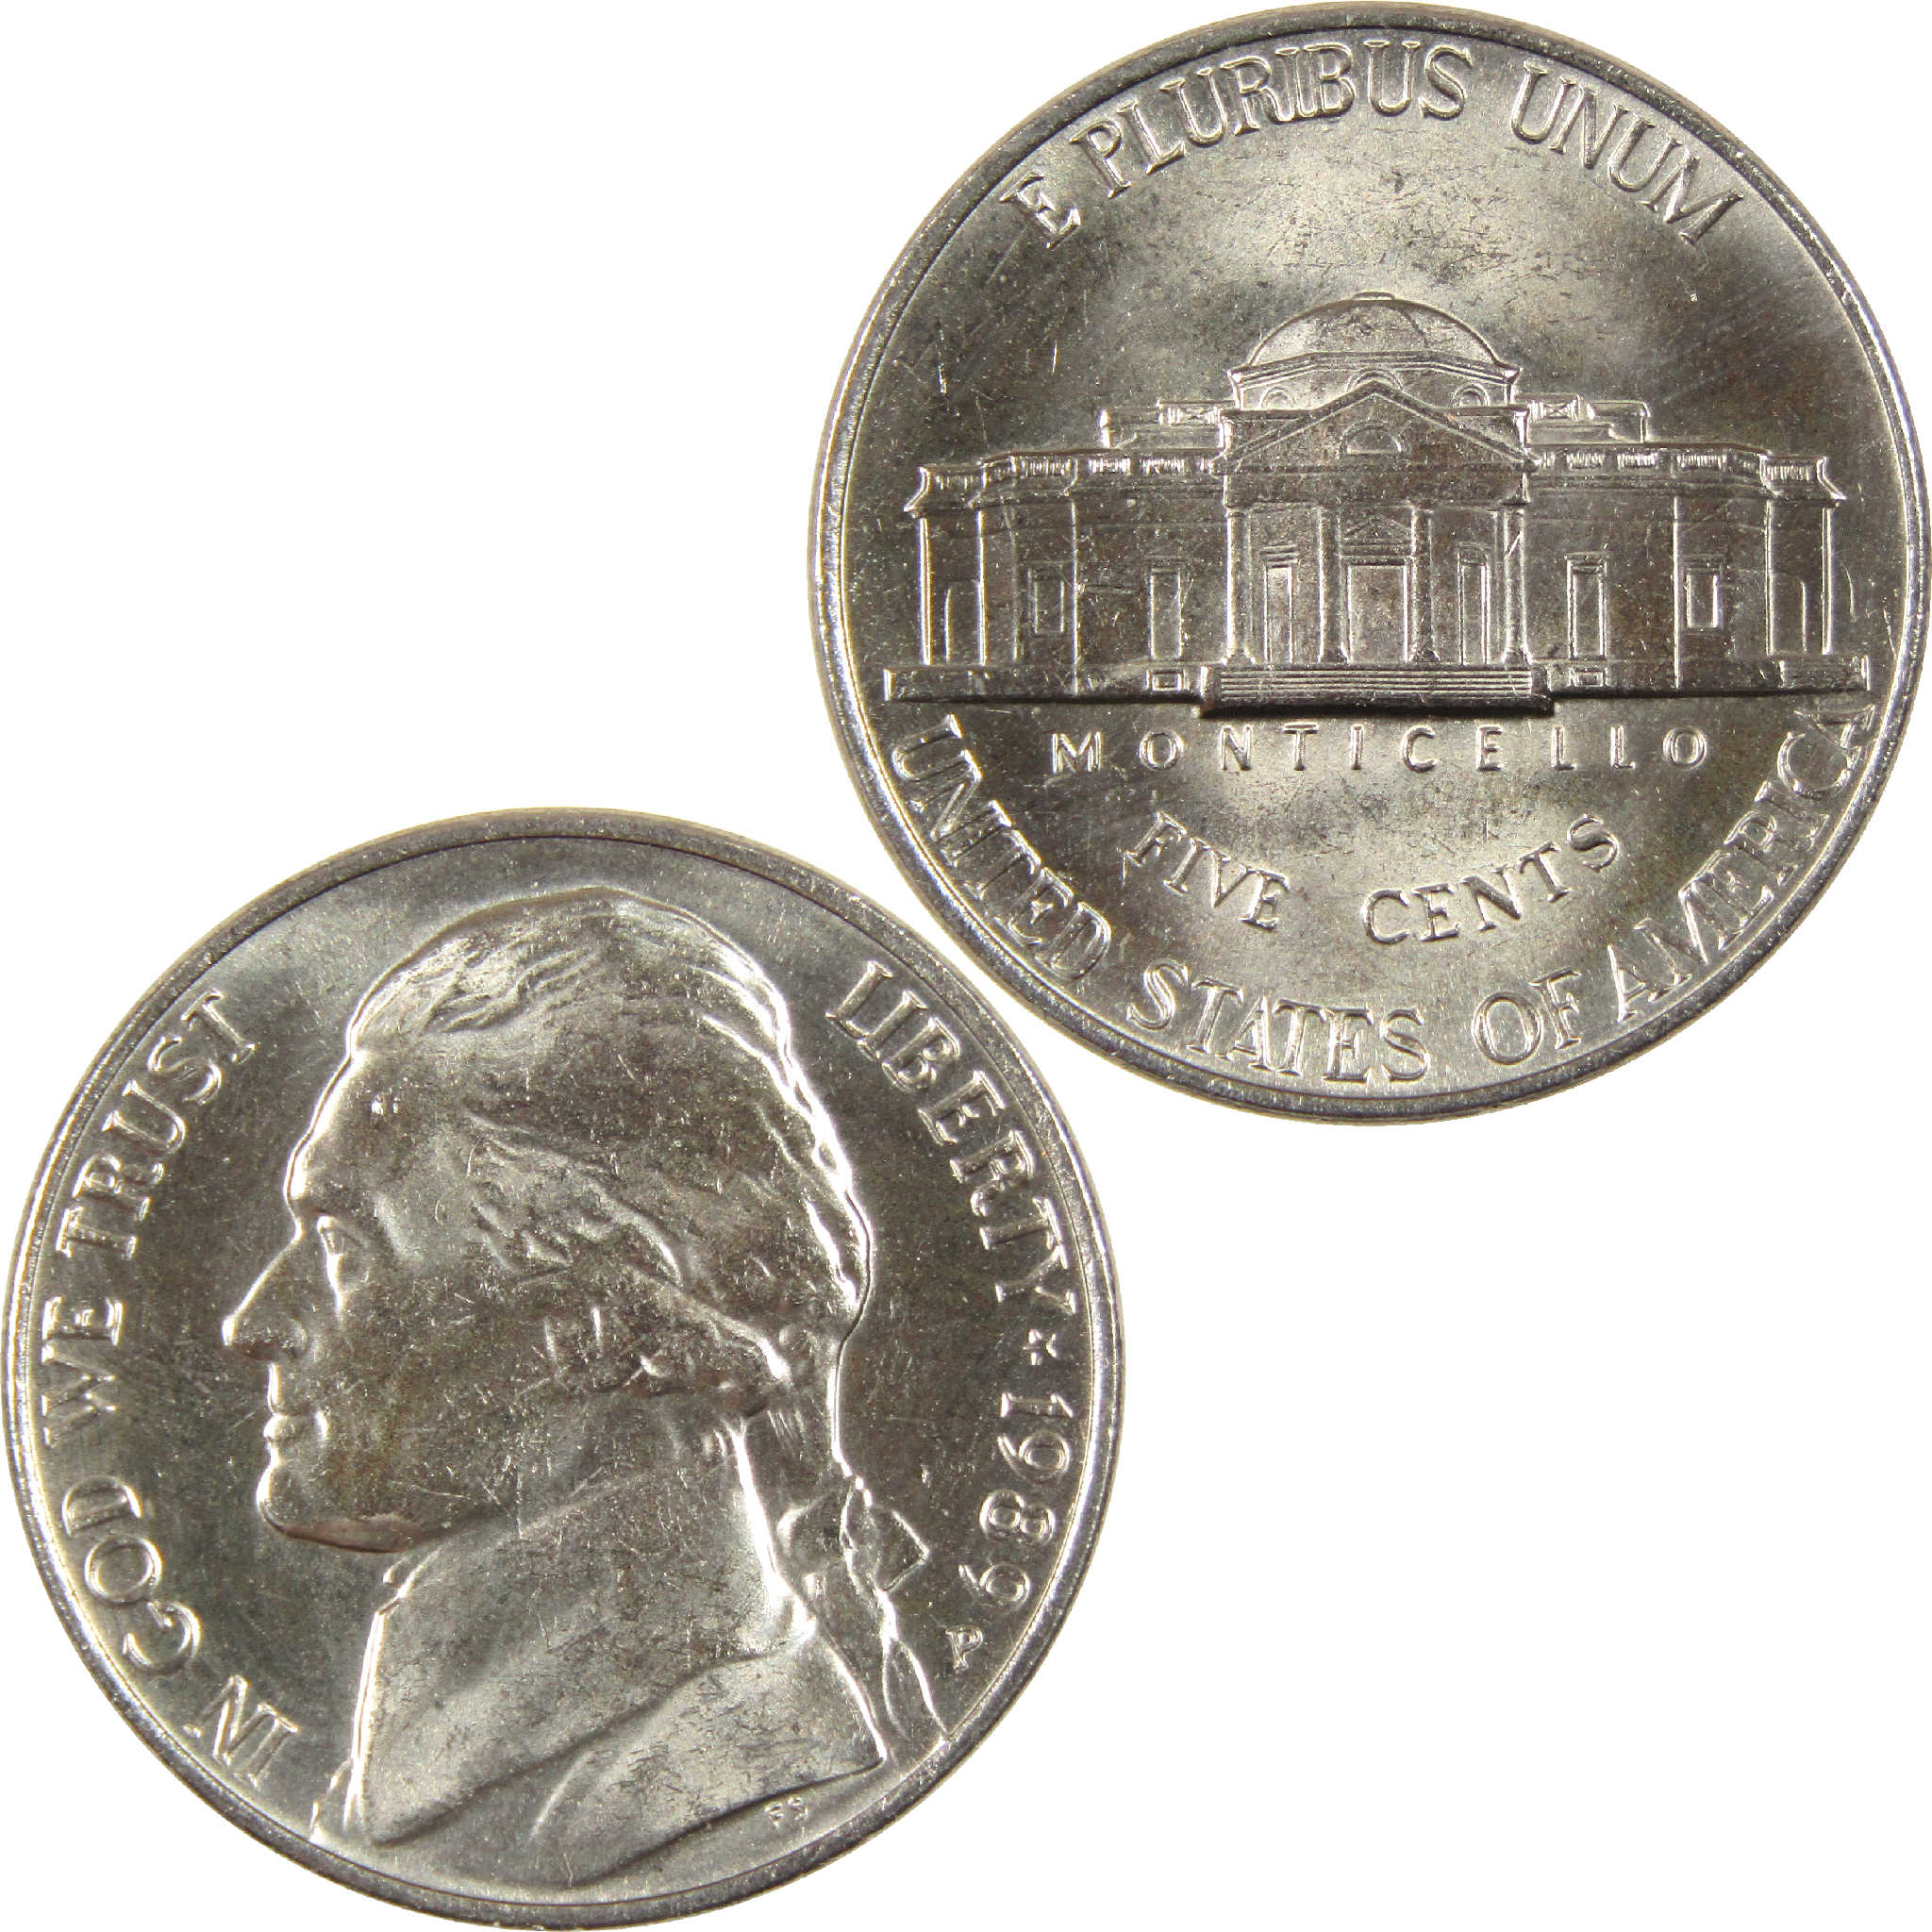 1989 P Jefferson Nickel Uncirculated 5c Coin